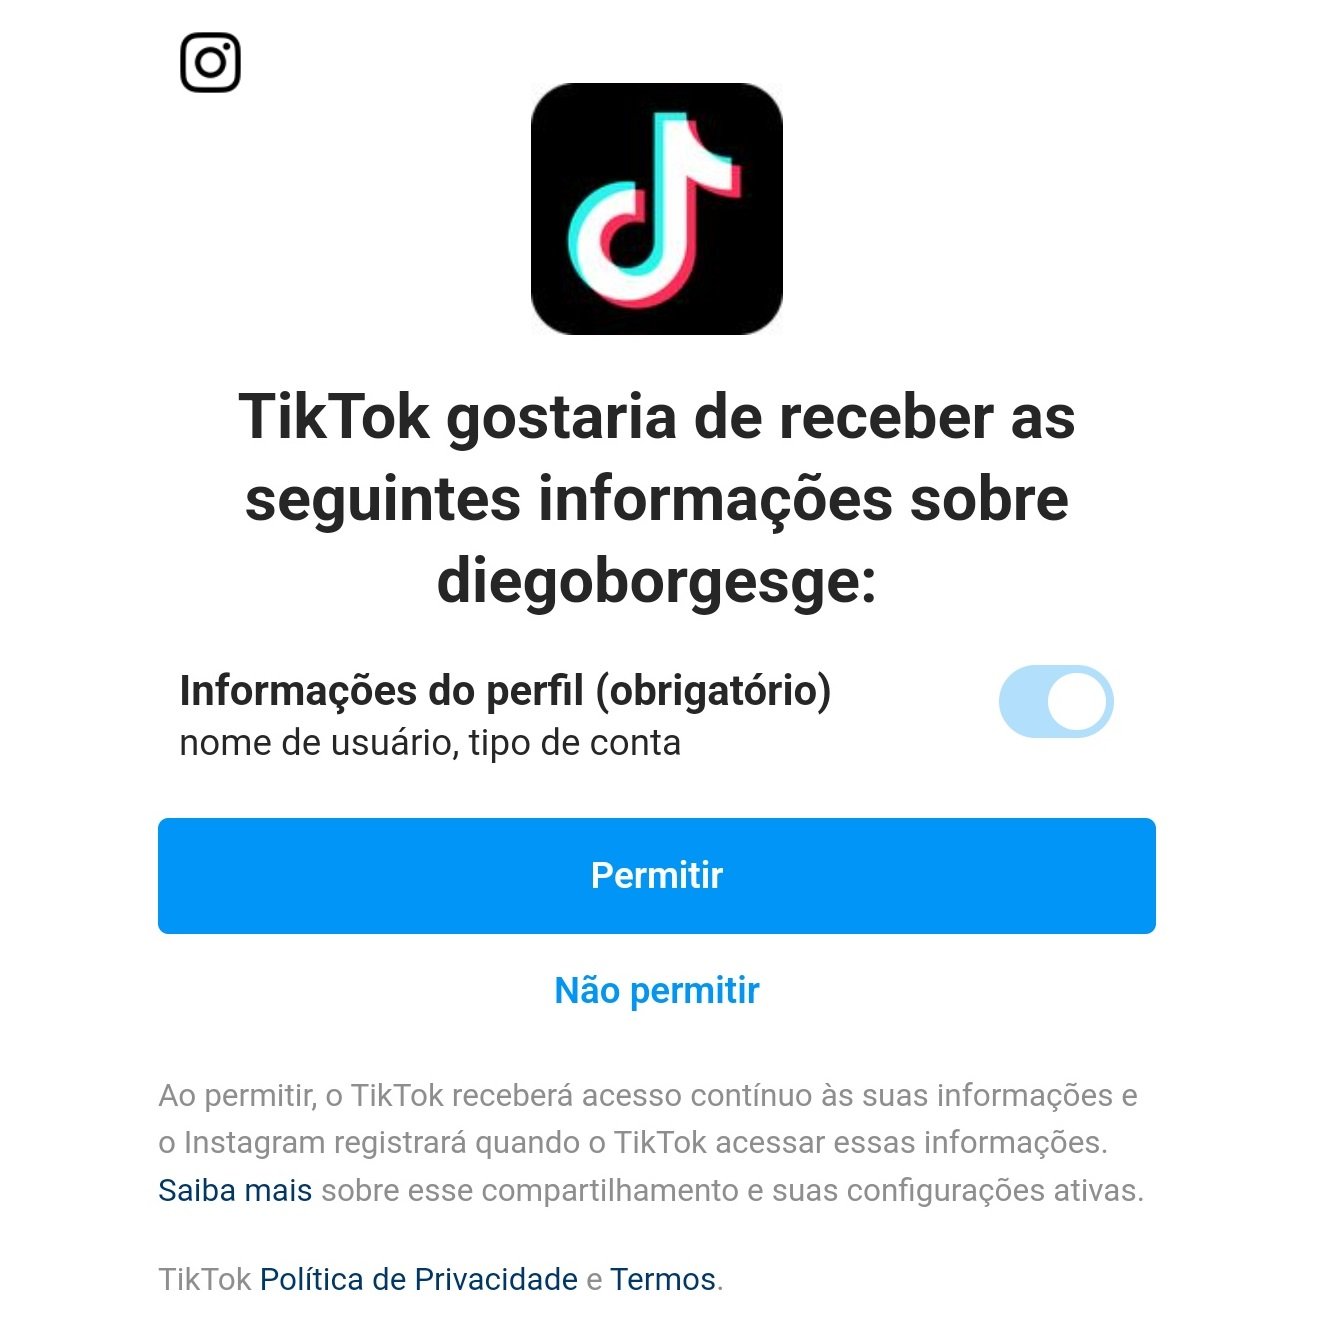 You must allow TikTok to access your Instagram profile information before accounts can be linked